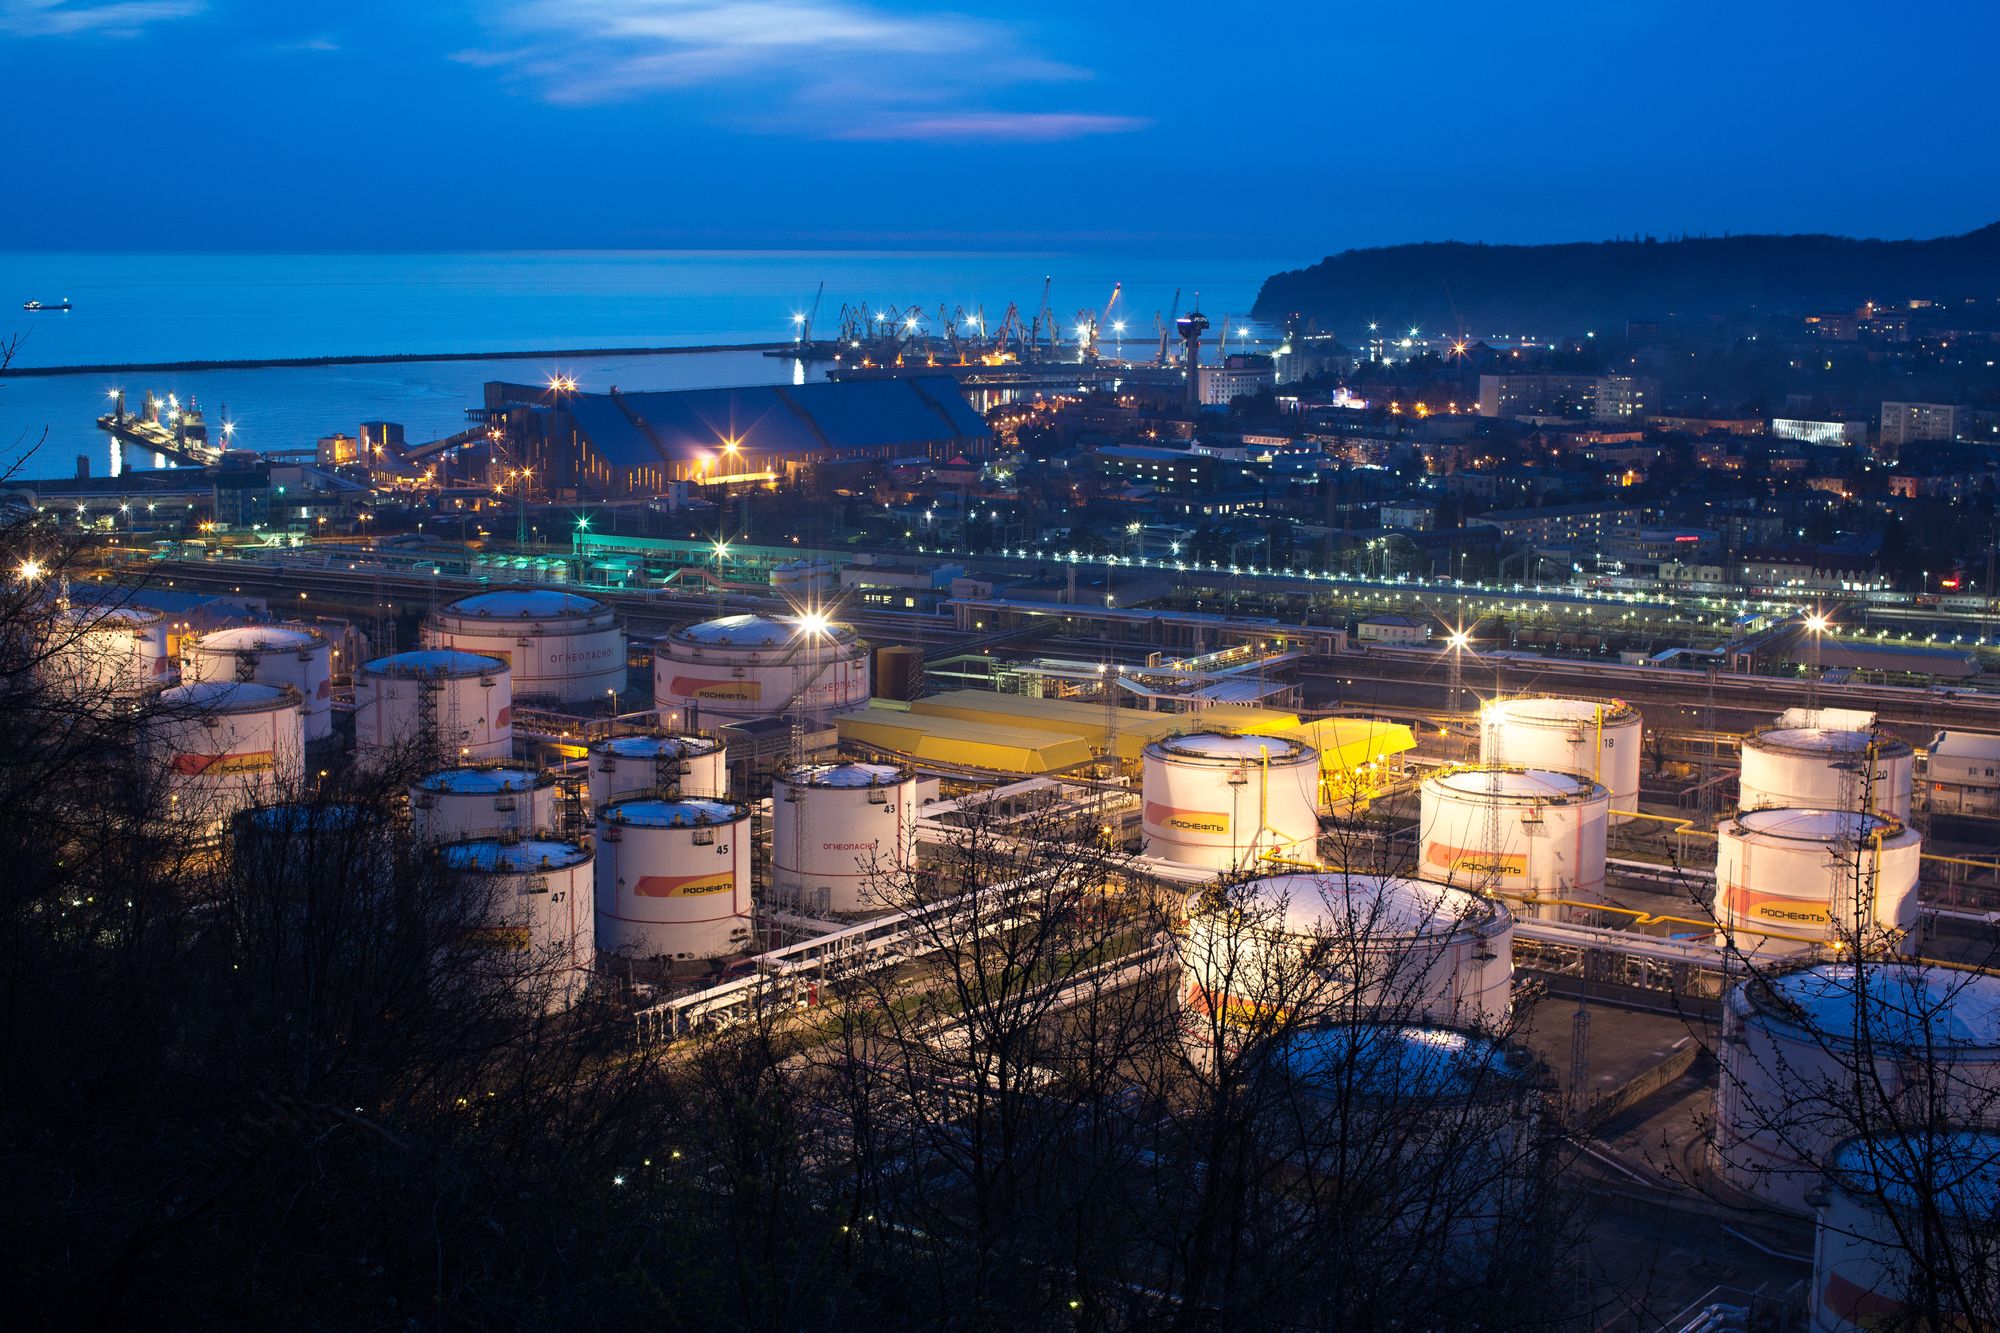 Oil storage tanks stand illuminated at night at the RN-Tuapsinsky refinery, operated by Rosneft Oil Co., in Tuapse, Russia